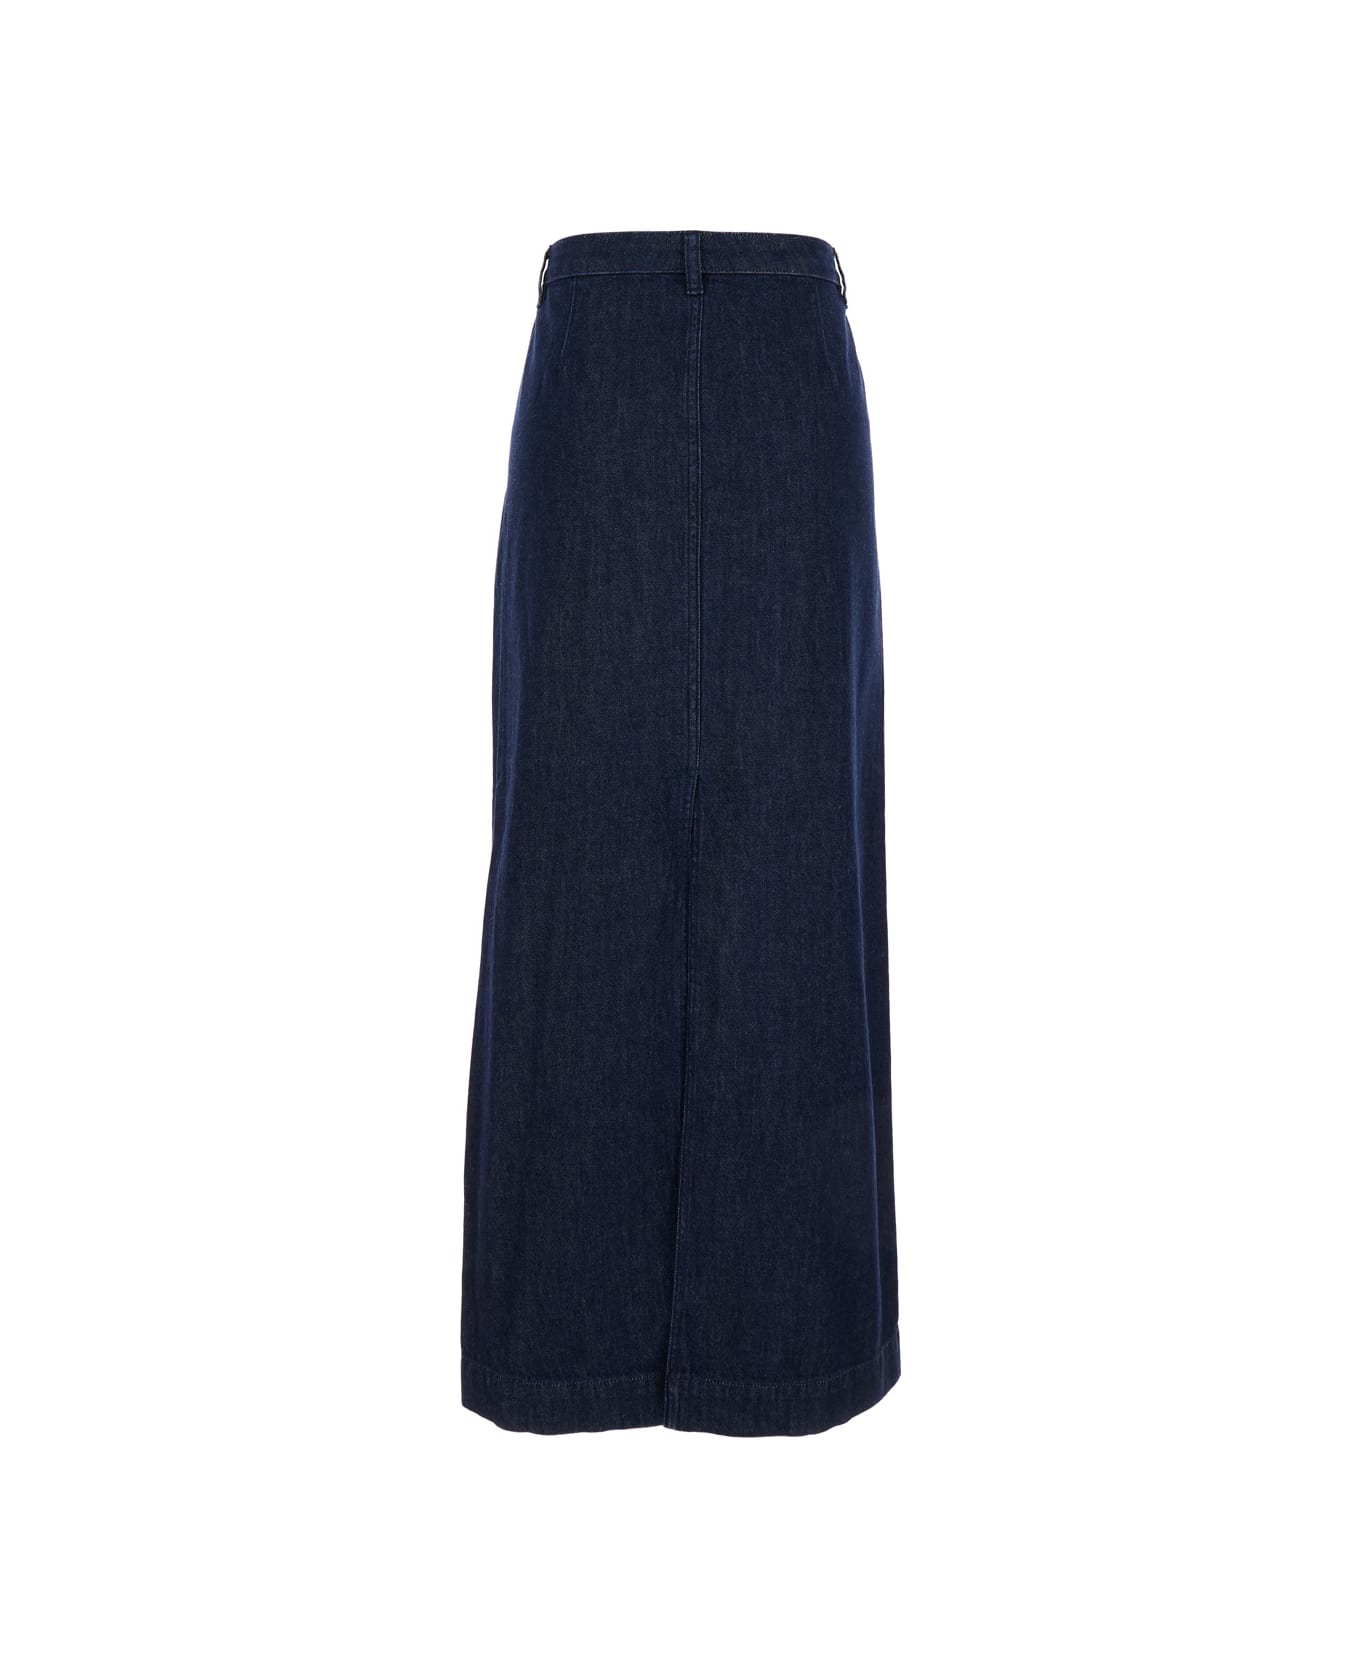 Theory Maxi Blue Skirt With Belt Loops In Cotton Denim Woman - Blu